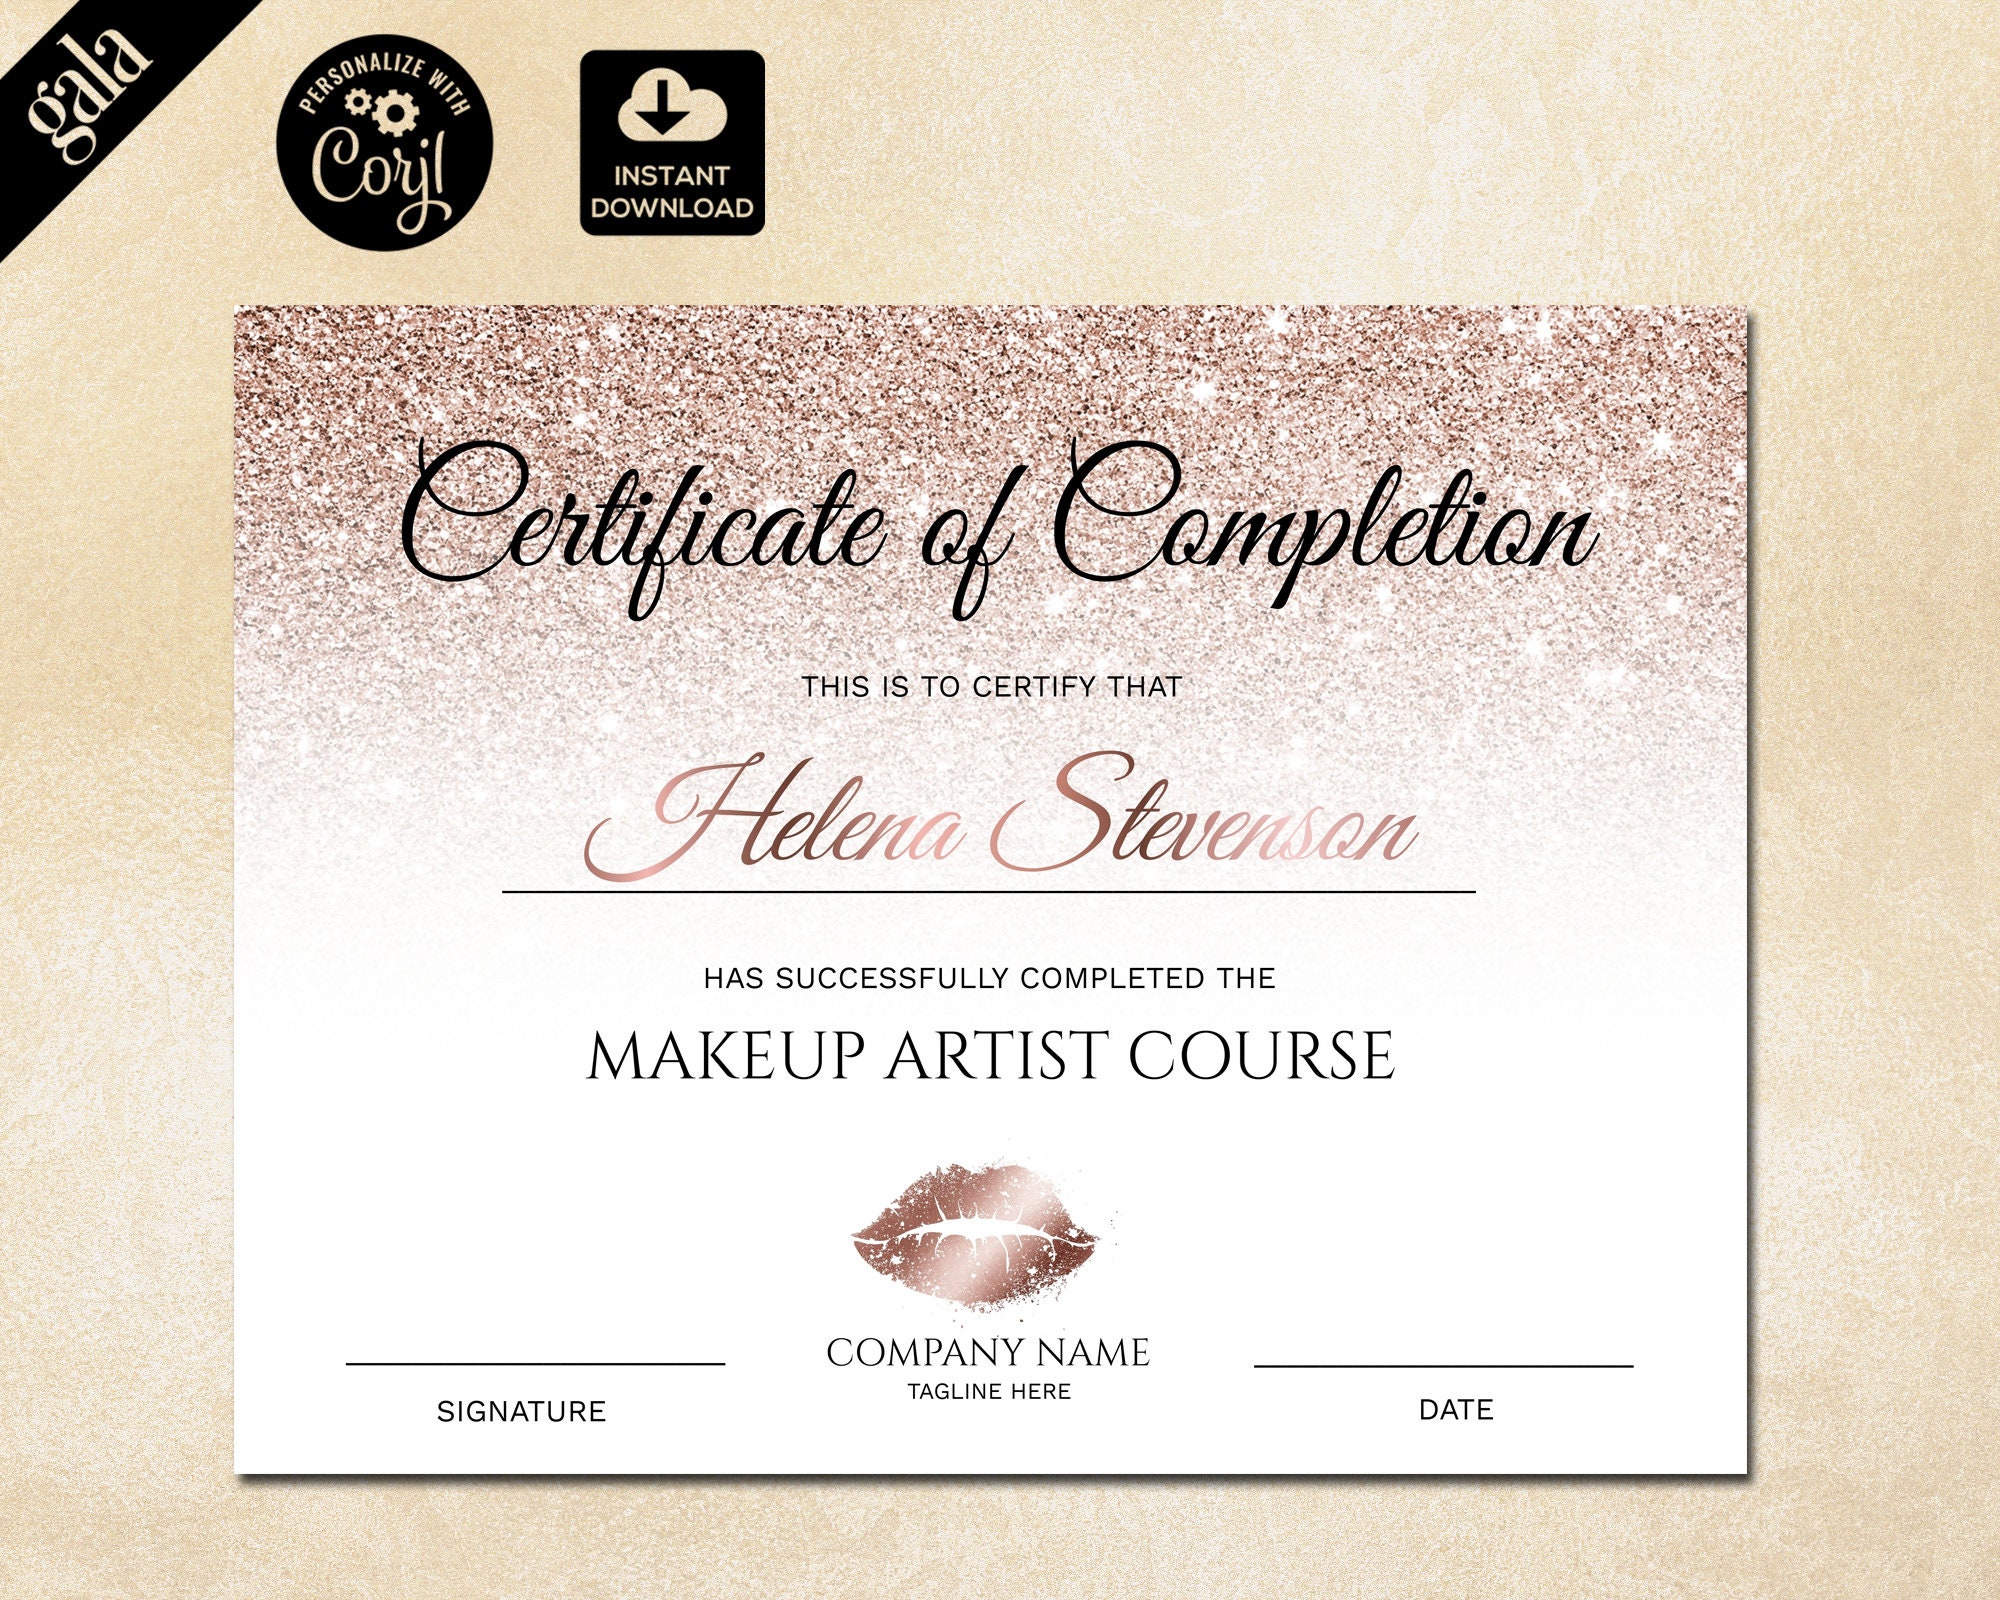 how to become a certified makeup artist in canada